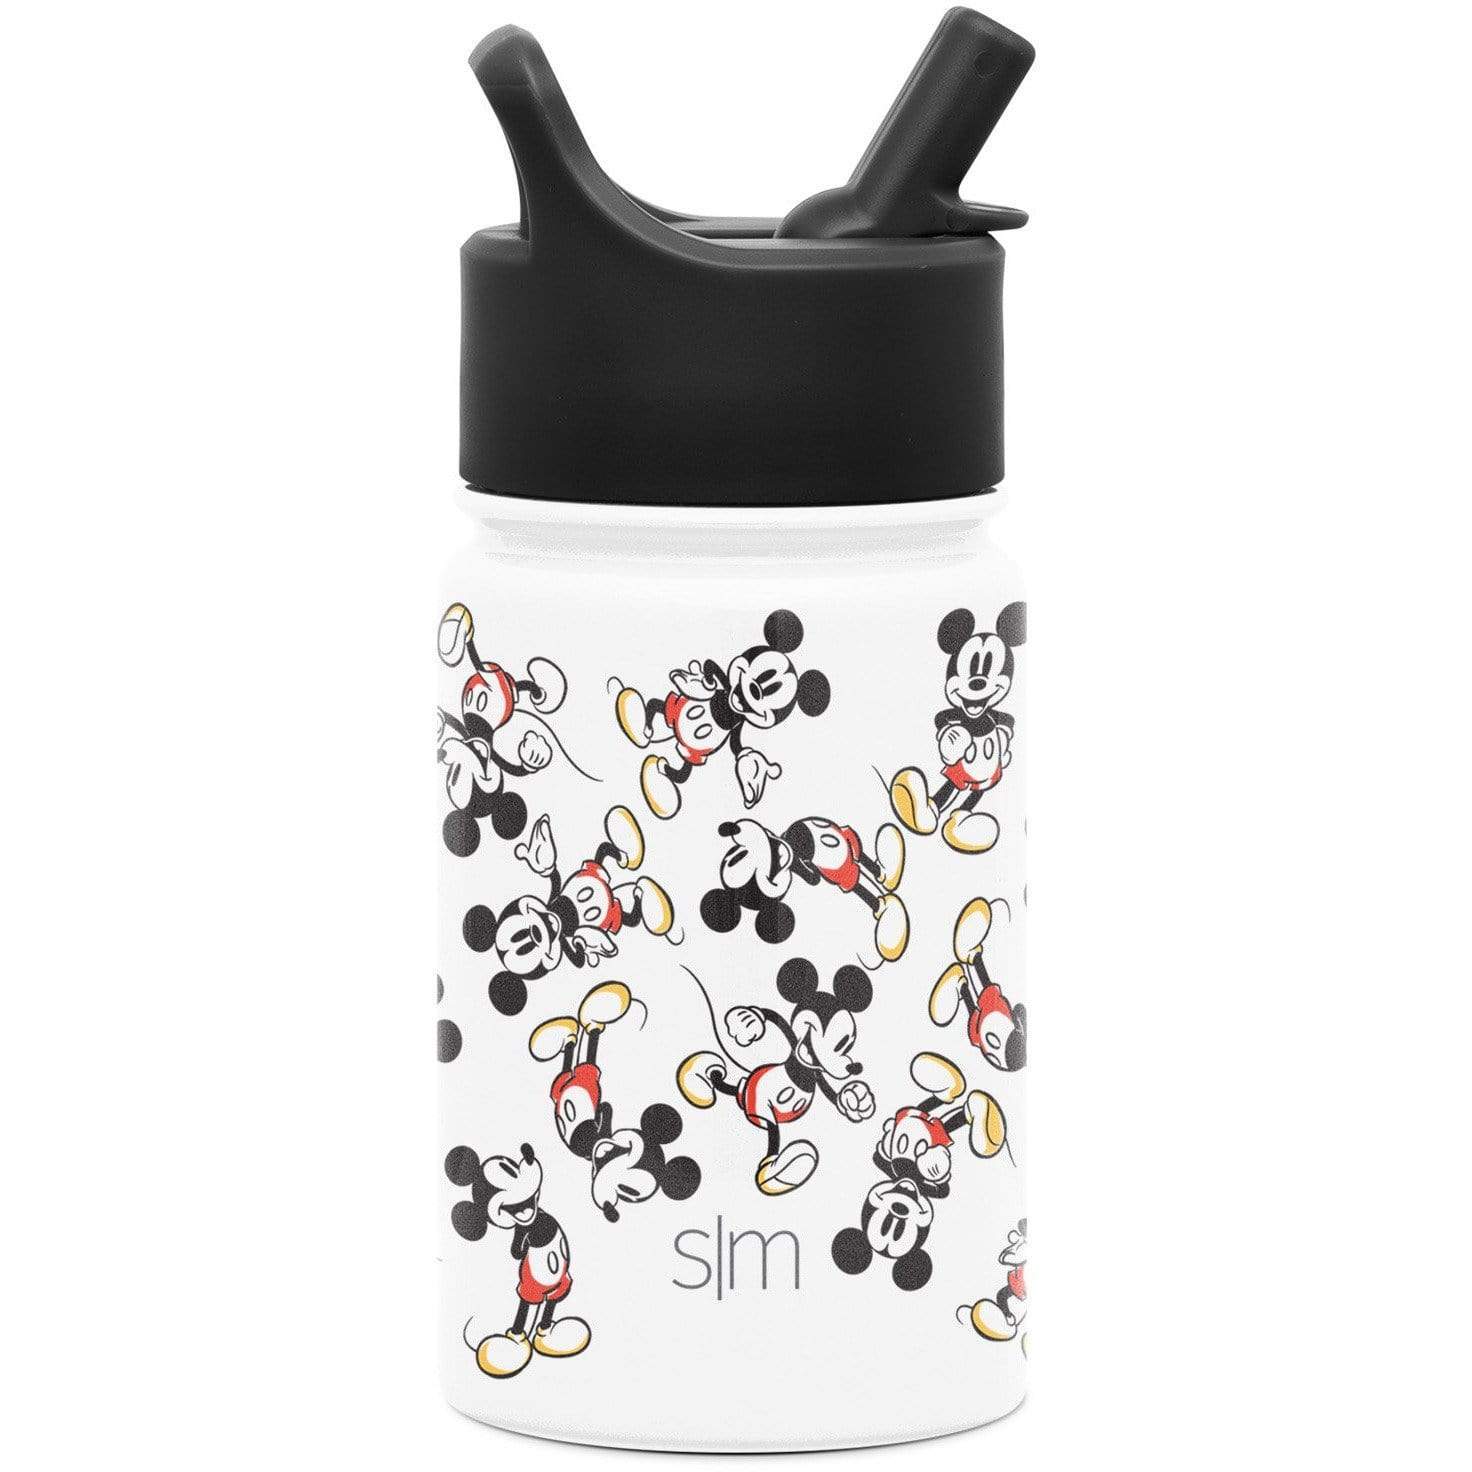 https://disneyfashionblog.com/wp-content/uploads/2020/09/simple-modern-branded-new-summit-water-bottle-with-straw-lid-disney-mickey-mouse-retro-summit-kids-water-bottle-with-straw-lid-10oz-summit-kids-stainless-steel-water-bottle-with-straw.jpg